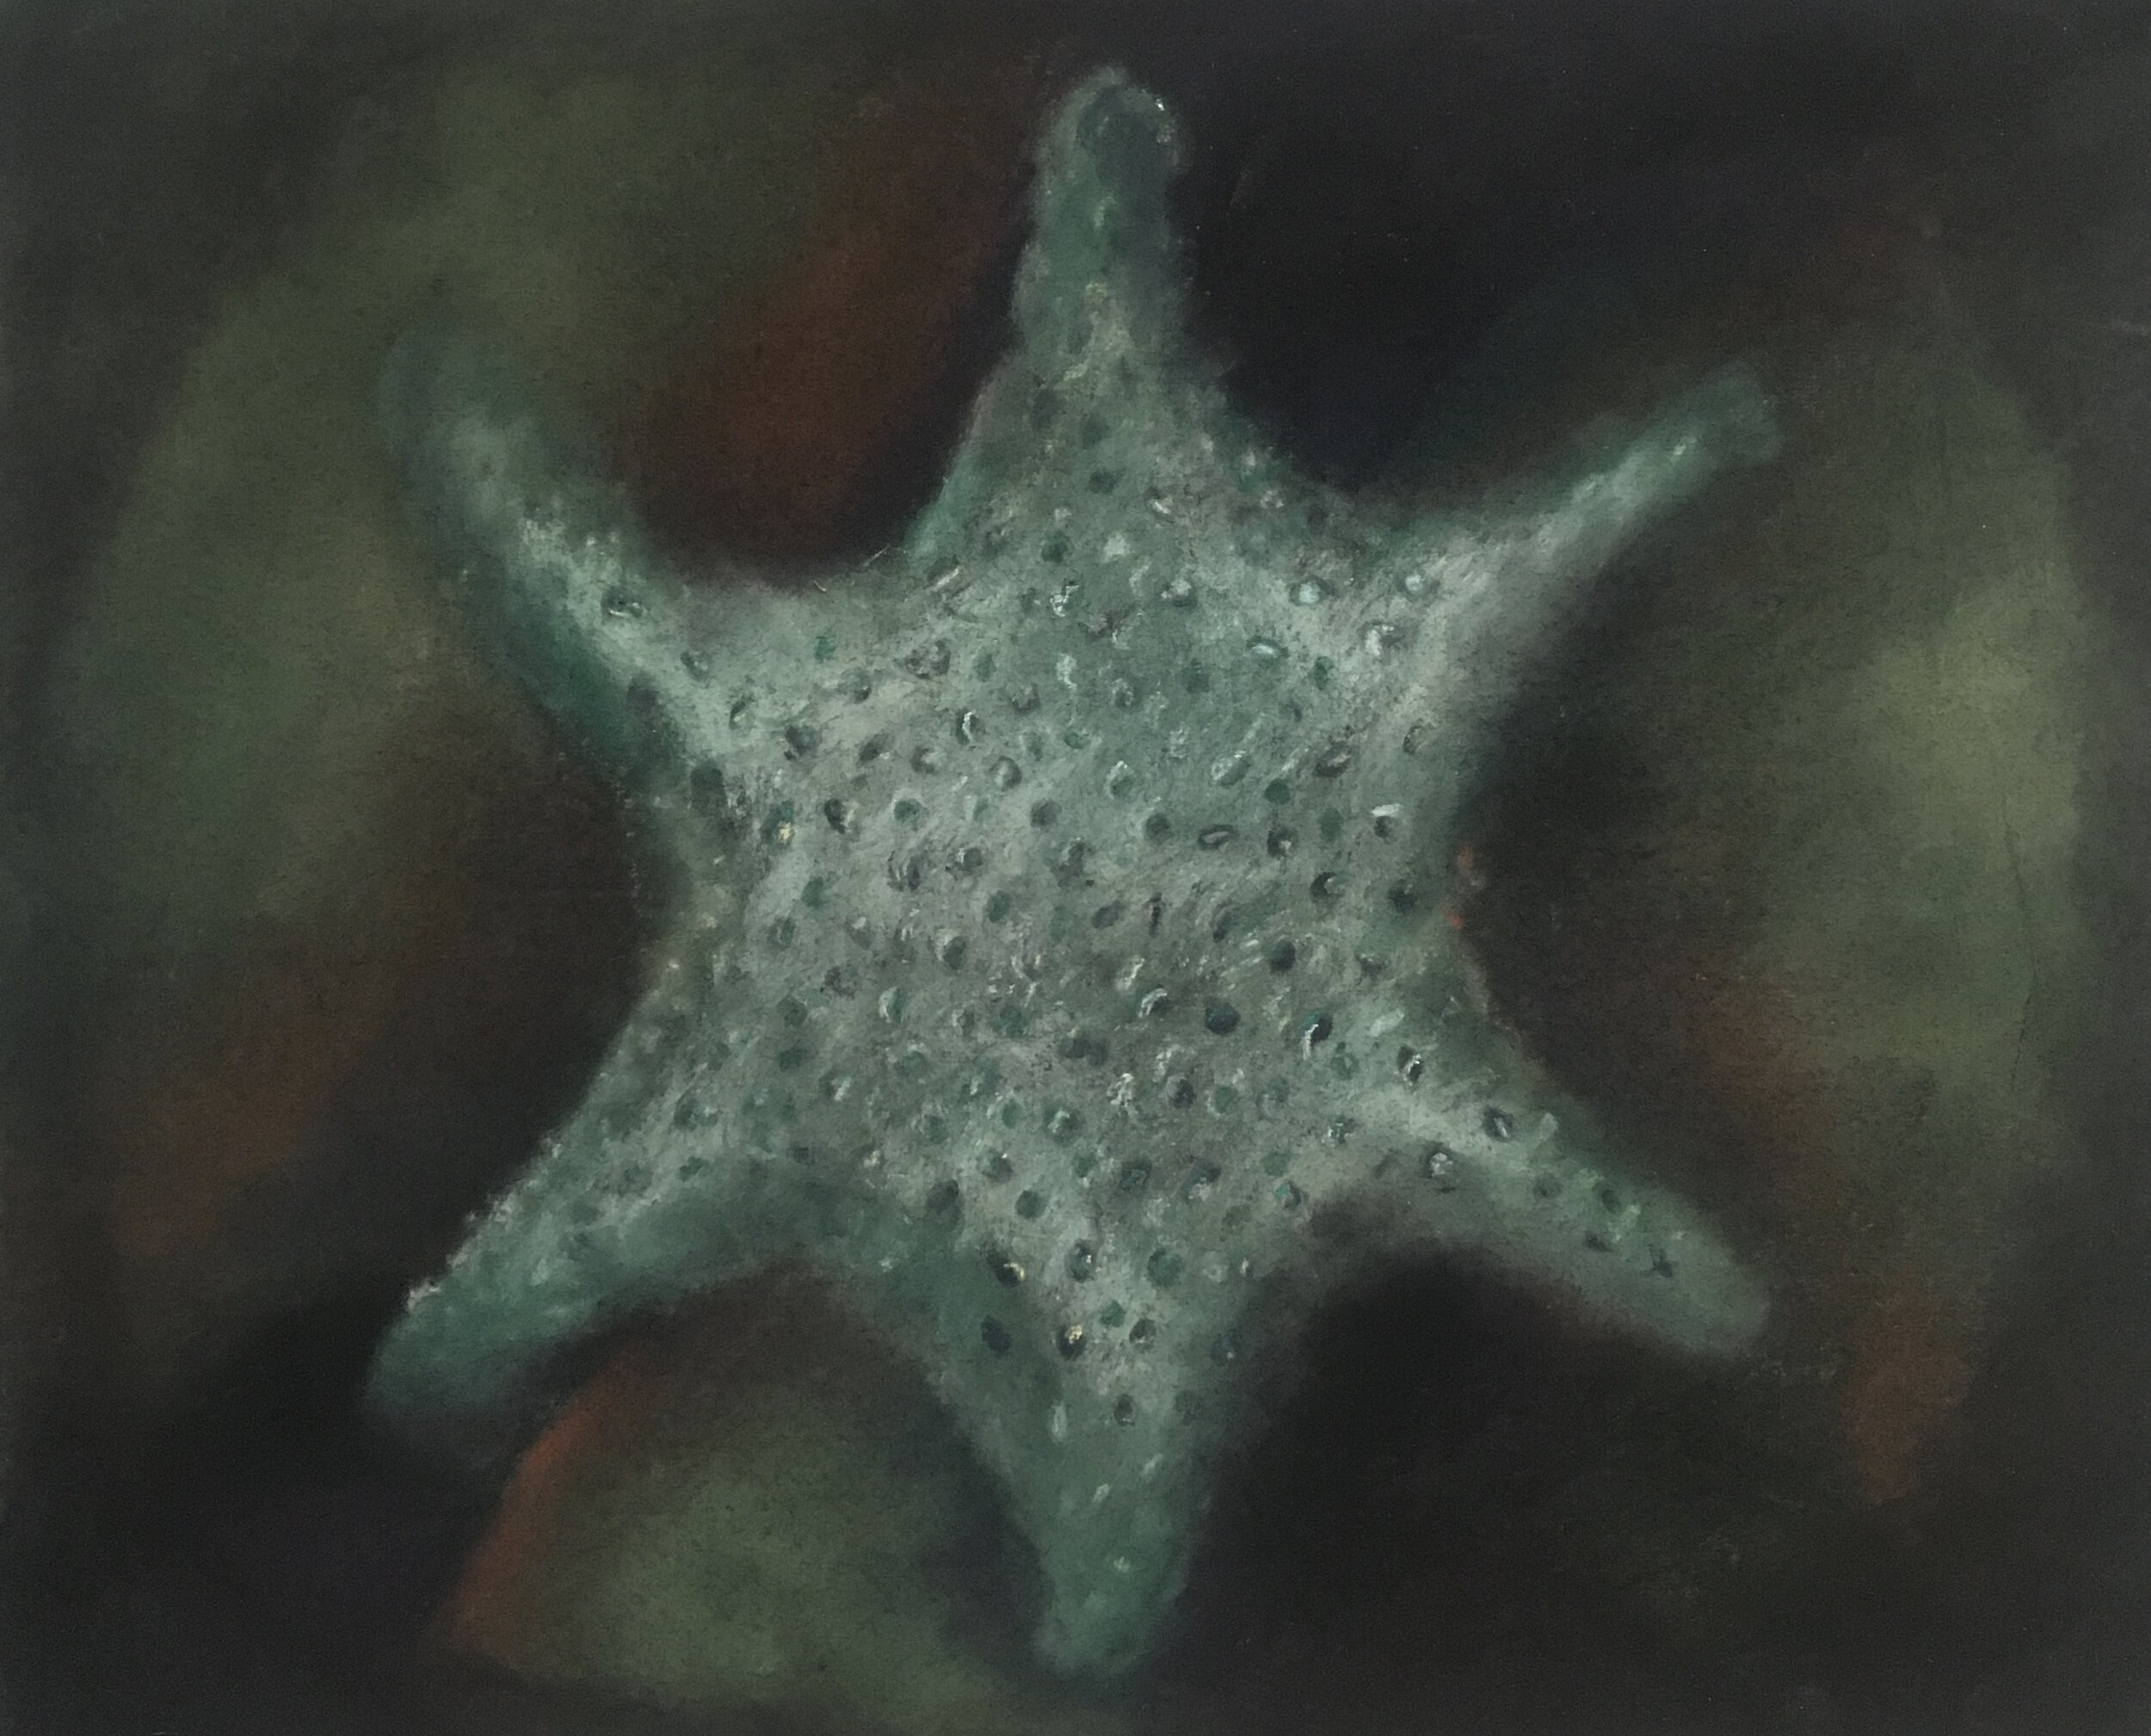  Magnified Grain of Sand II, 2020, pastel on paper, 13” X 16” 